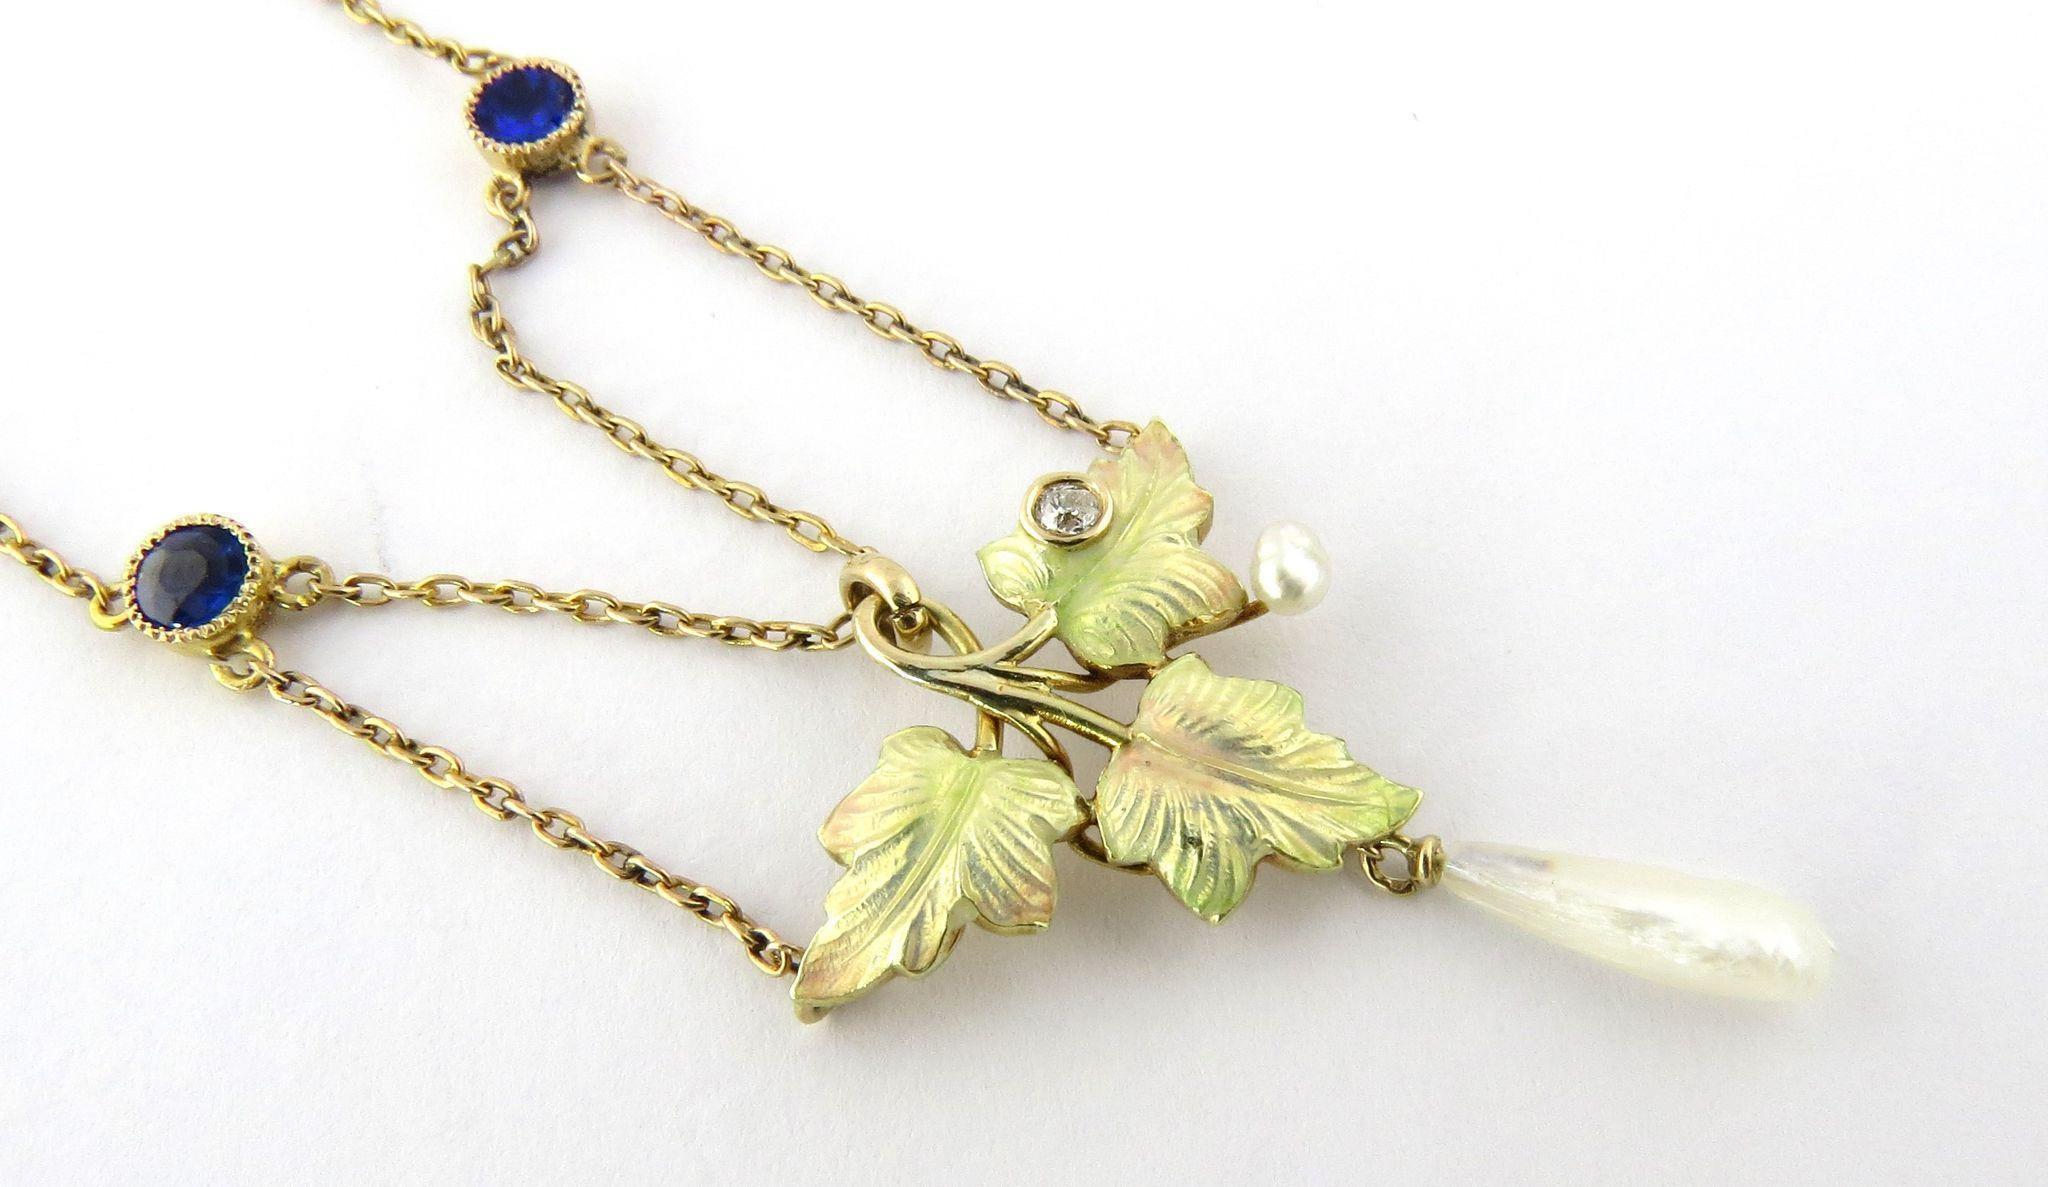 Antique Art Nouveau 14K Yellow Gold Enameled Leaf Diamond and Blue Garnet Necklace. 

Delicate and dainty, this draped chain holds iridescent pink and green enameled leaves with a freshwater pearl drop. One leaf holds a bezel set old minor cut